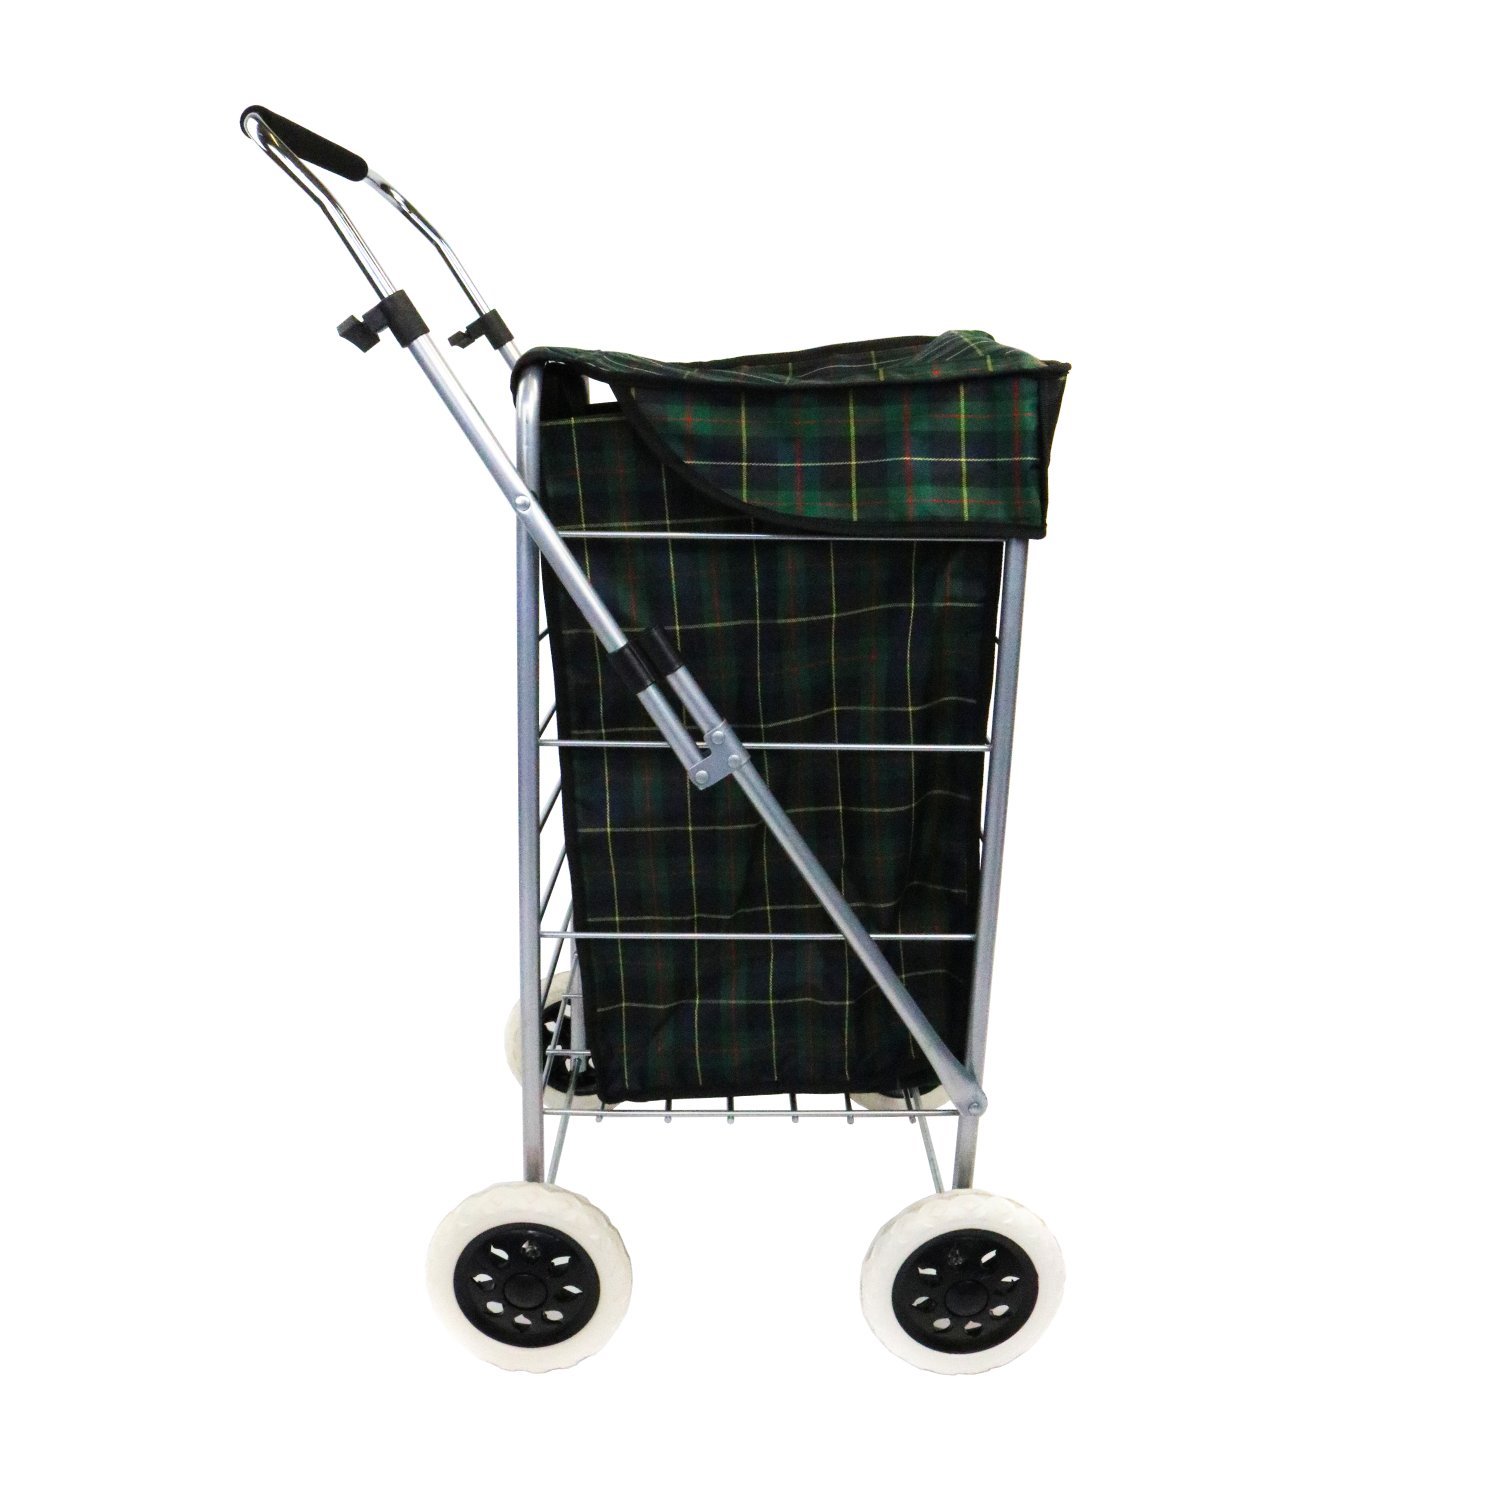 4 Wheel Shopping Bag Cart Market Laundry - £36.99 : - Stocking the very best in Toys, Electrical, Furniture, Homeware, Garden, Gifts and much more!